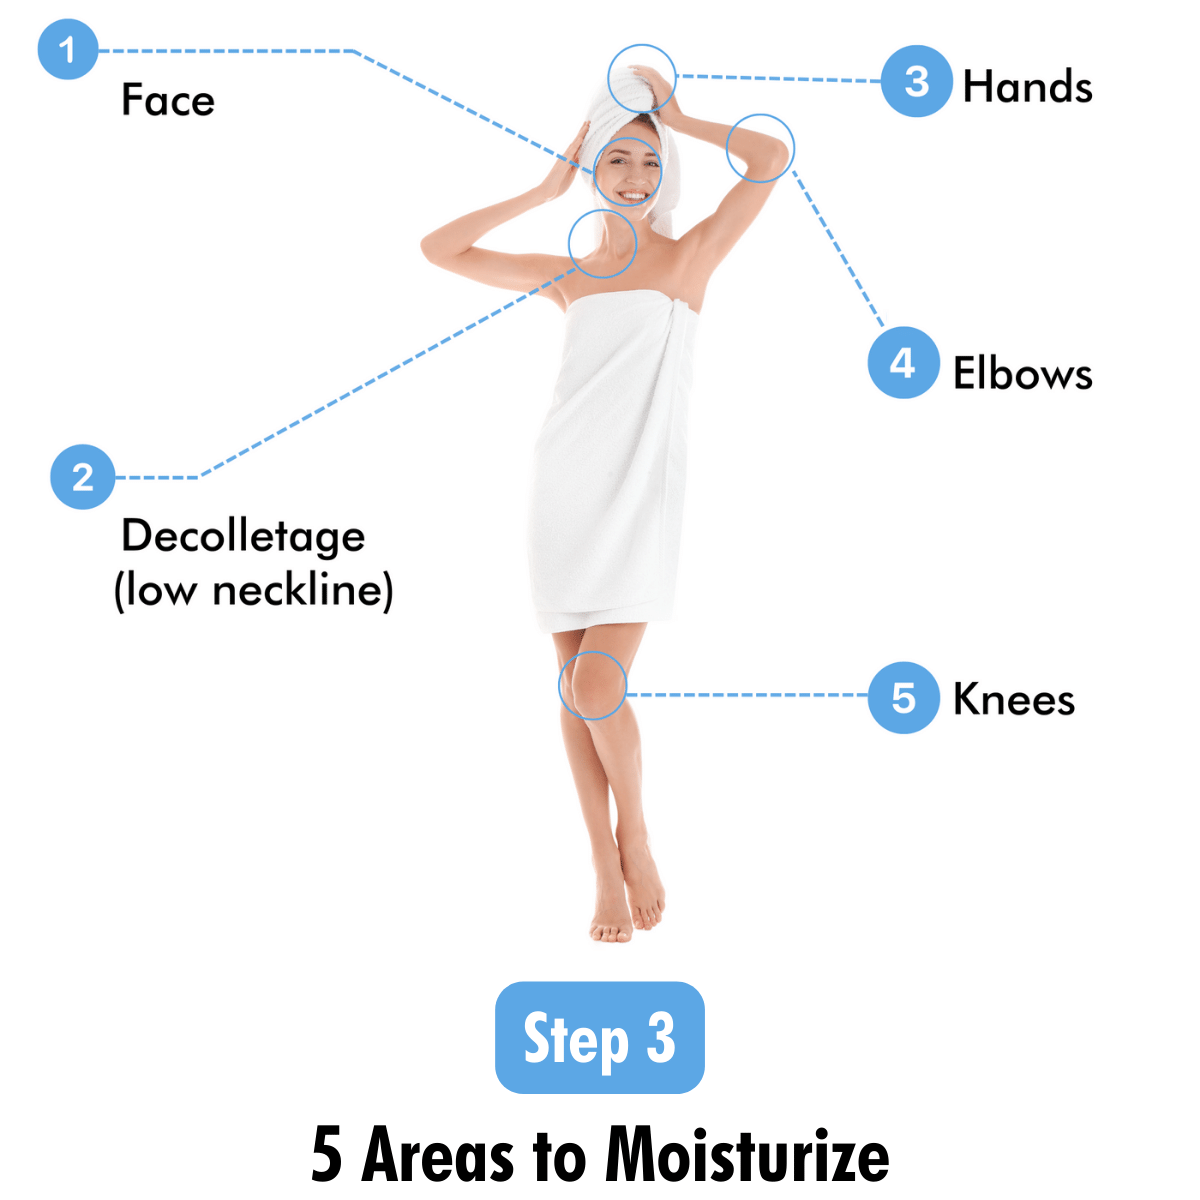 Step 3 of Mirai Clinical's body lotion application: Detailed illustration highlighting the five essential areas to moisturize with the persimmon-infused deodorizing lotion for soft, refreshed skin."